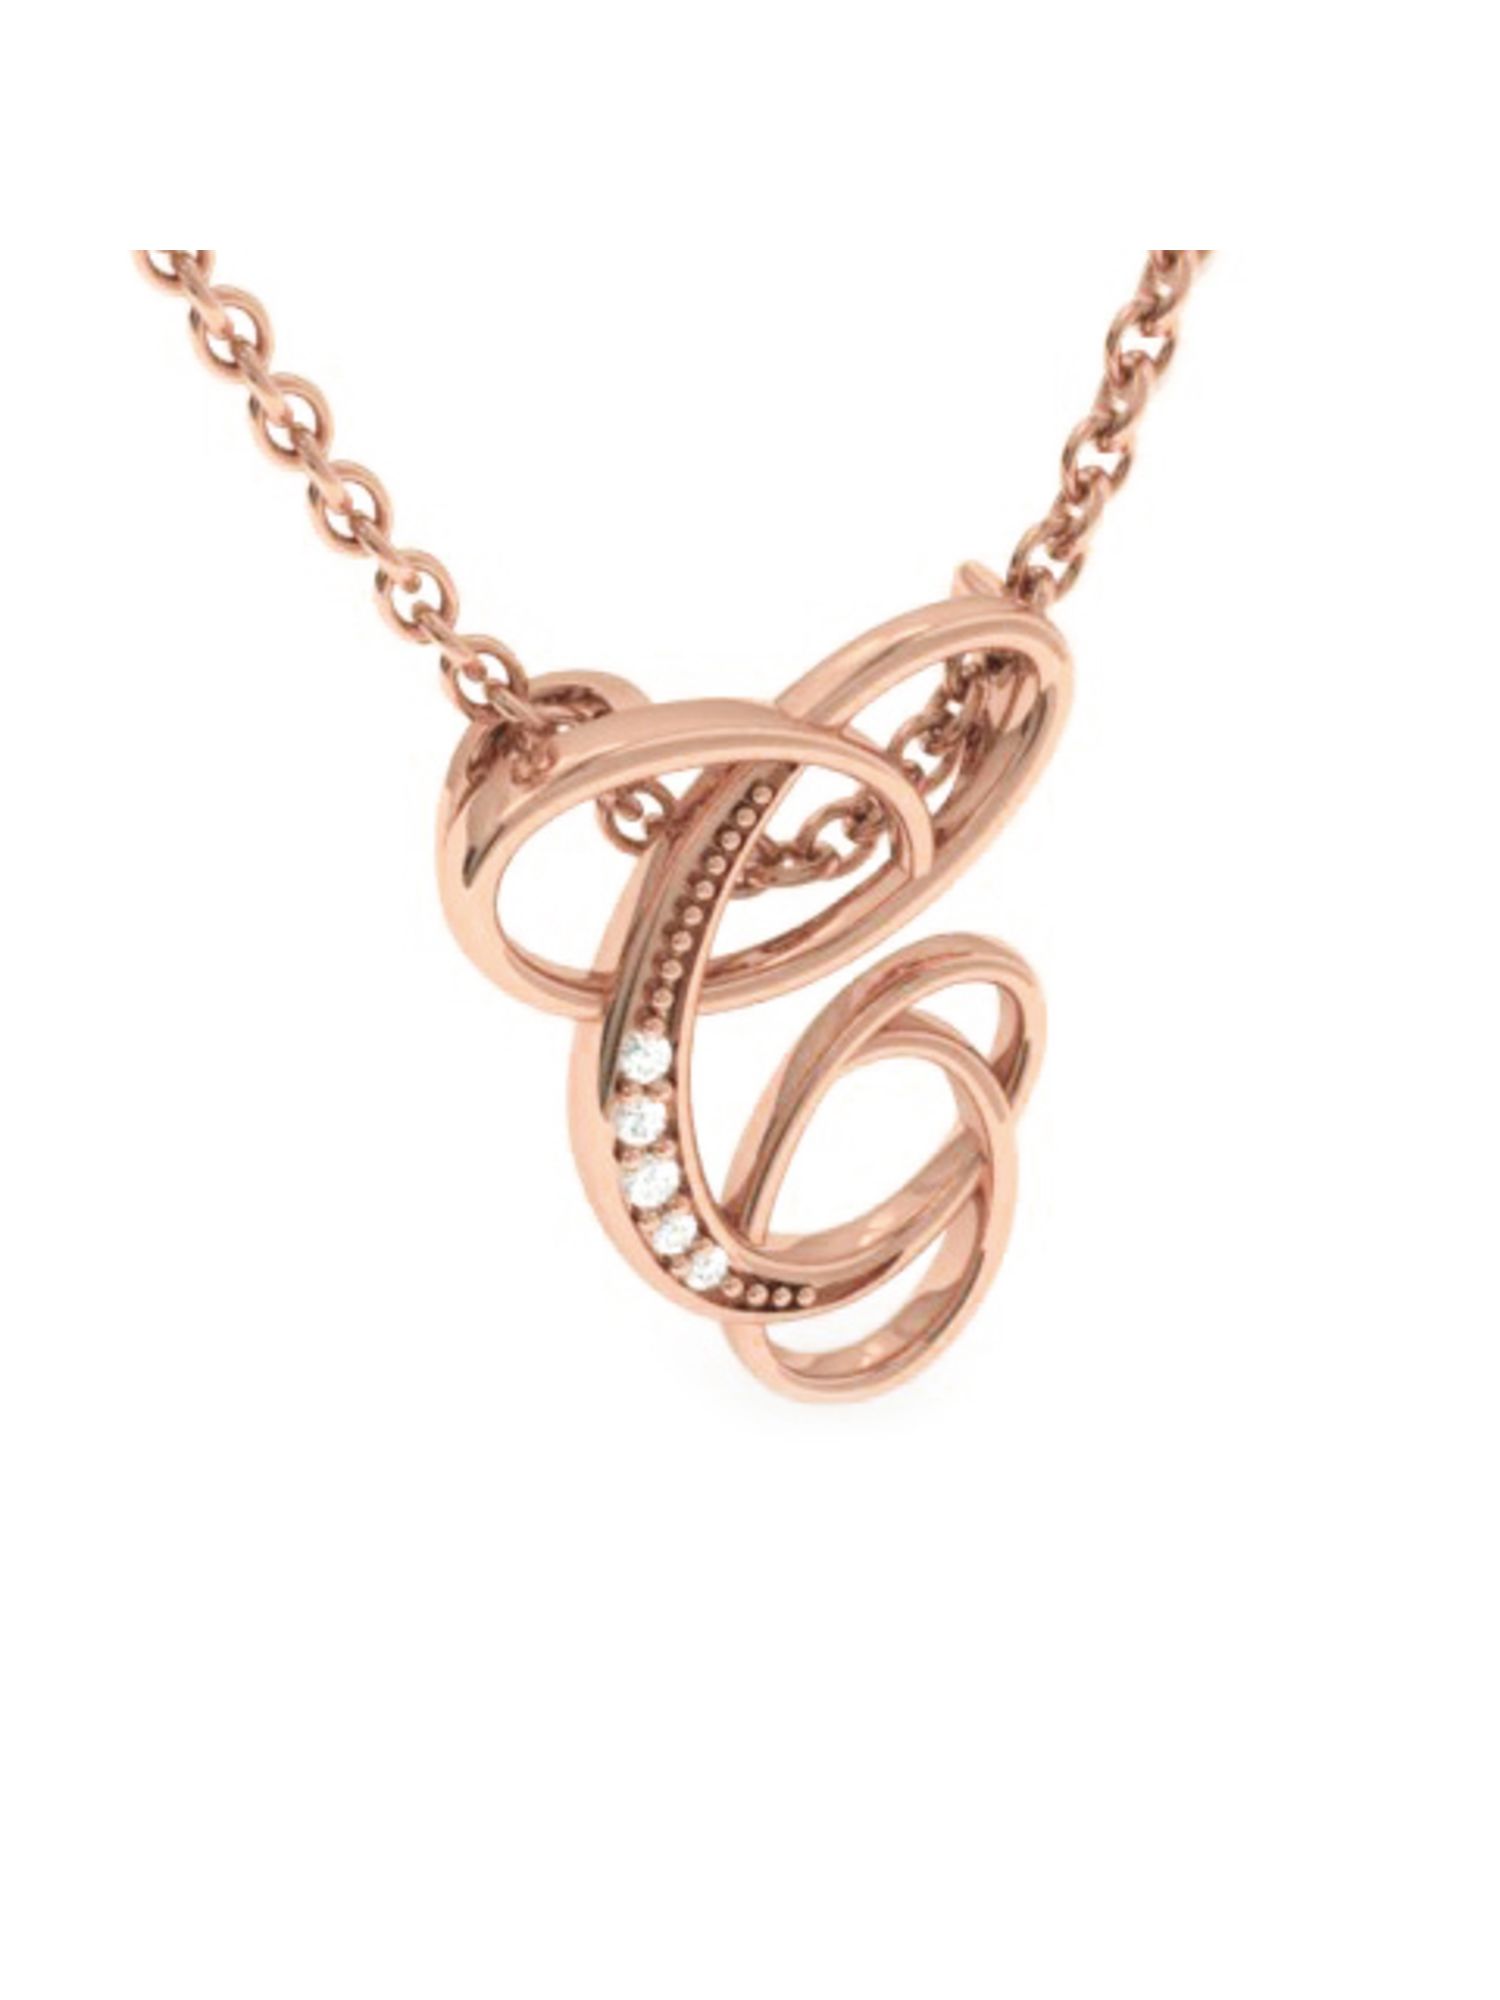 A Initial Necklace In Rose Gold With 6 Diamonds With Free Chain | eBay